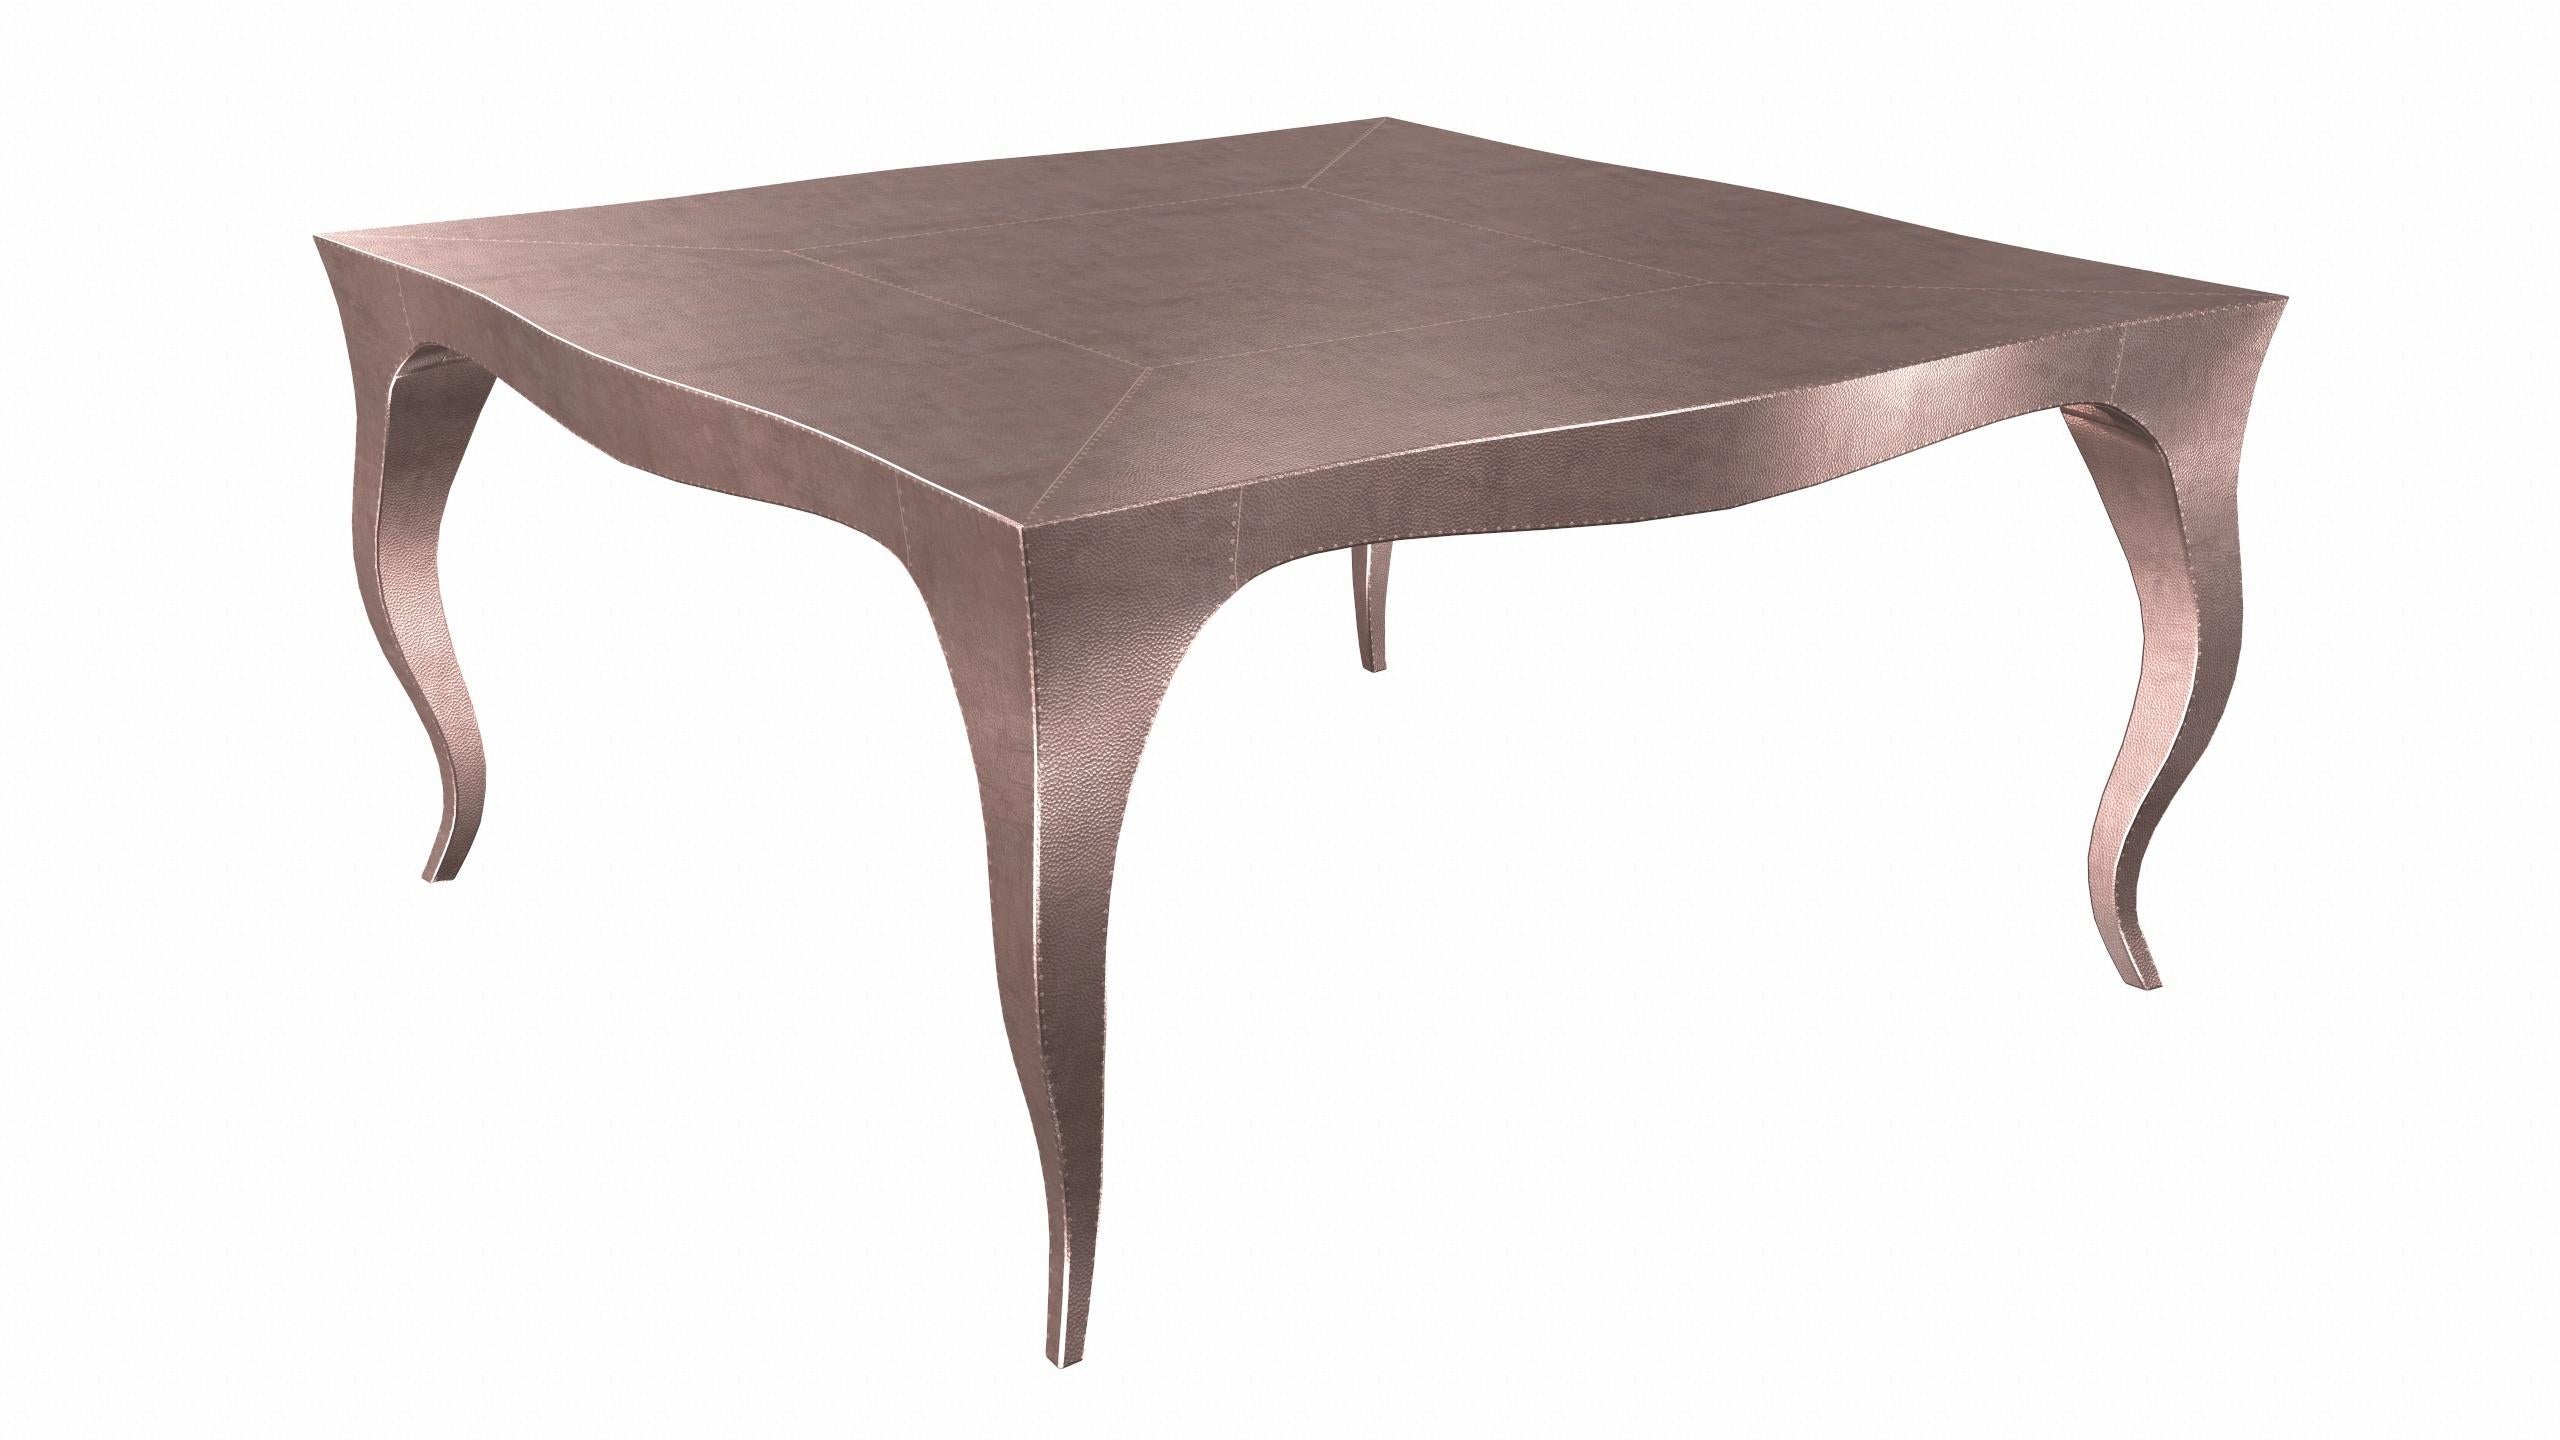 Hand-Carved Louise Art Deco Center Tables Mid. Hammered Copper by Paul Mathieu for S.Odegard For Sale